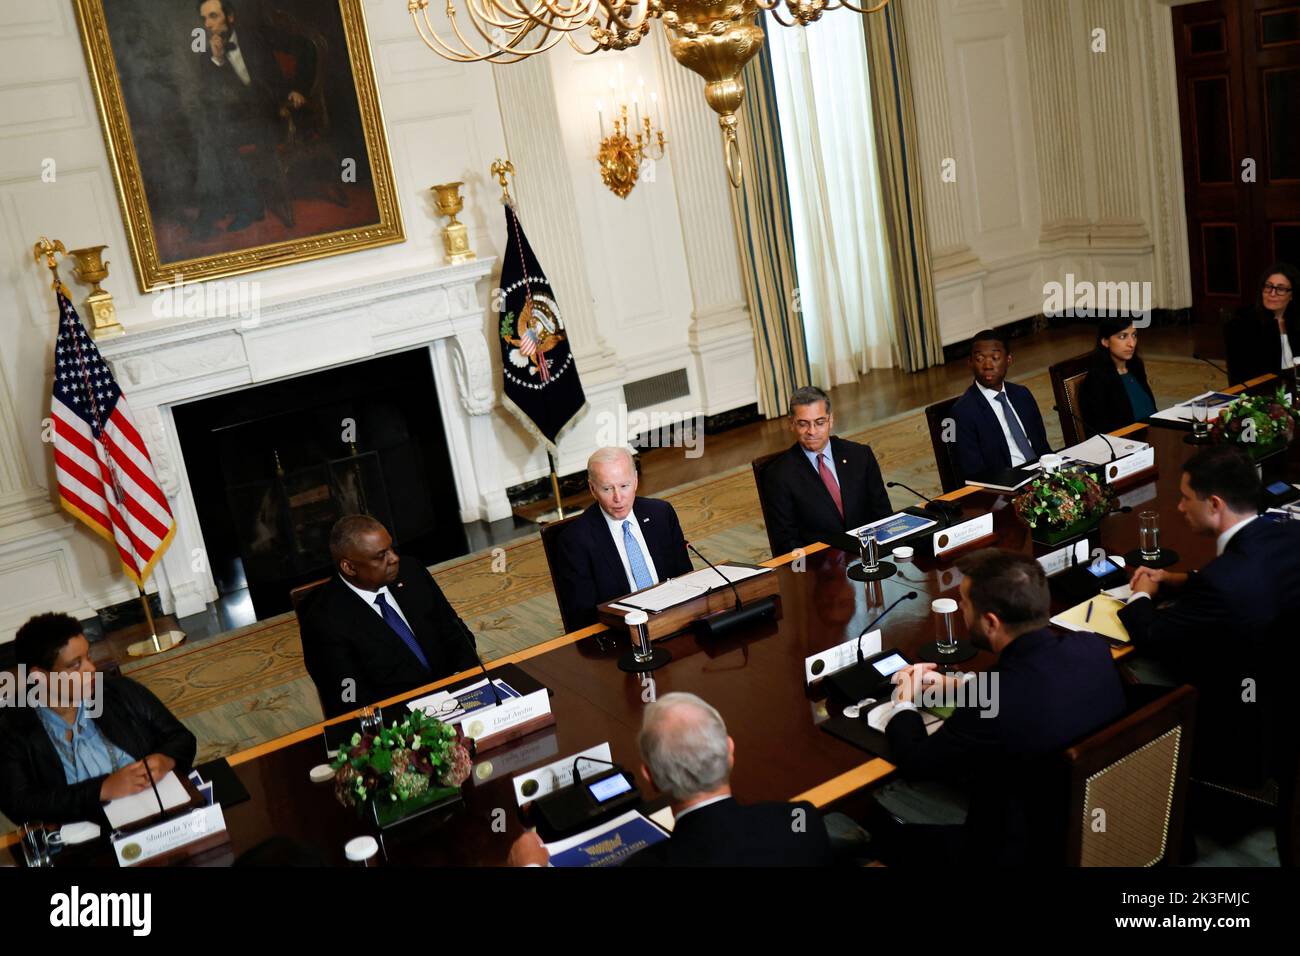 U.S. President Joe Biden, seated between Defense Secretary Lloyd Austin and Secretary of Health and Human Services (HHS) Xavier Becerra,  delivers remarks at a meeting of the White House Competition Council in the State Dining Room of the White House in Washington, U.S. September 26, 2022.  REUTERS/Jonathan Ernst Stock Photo